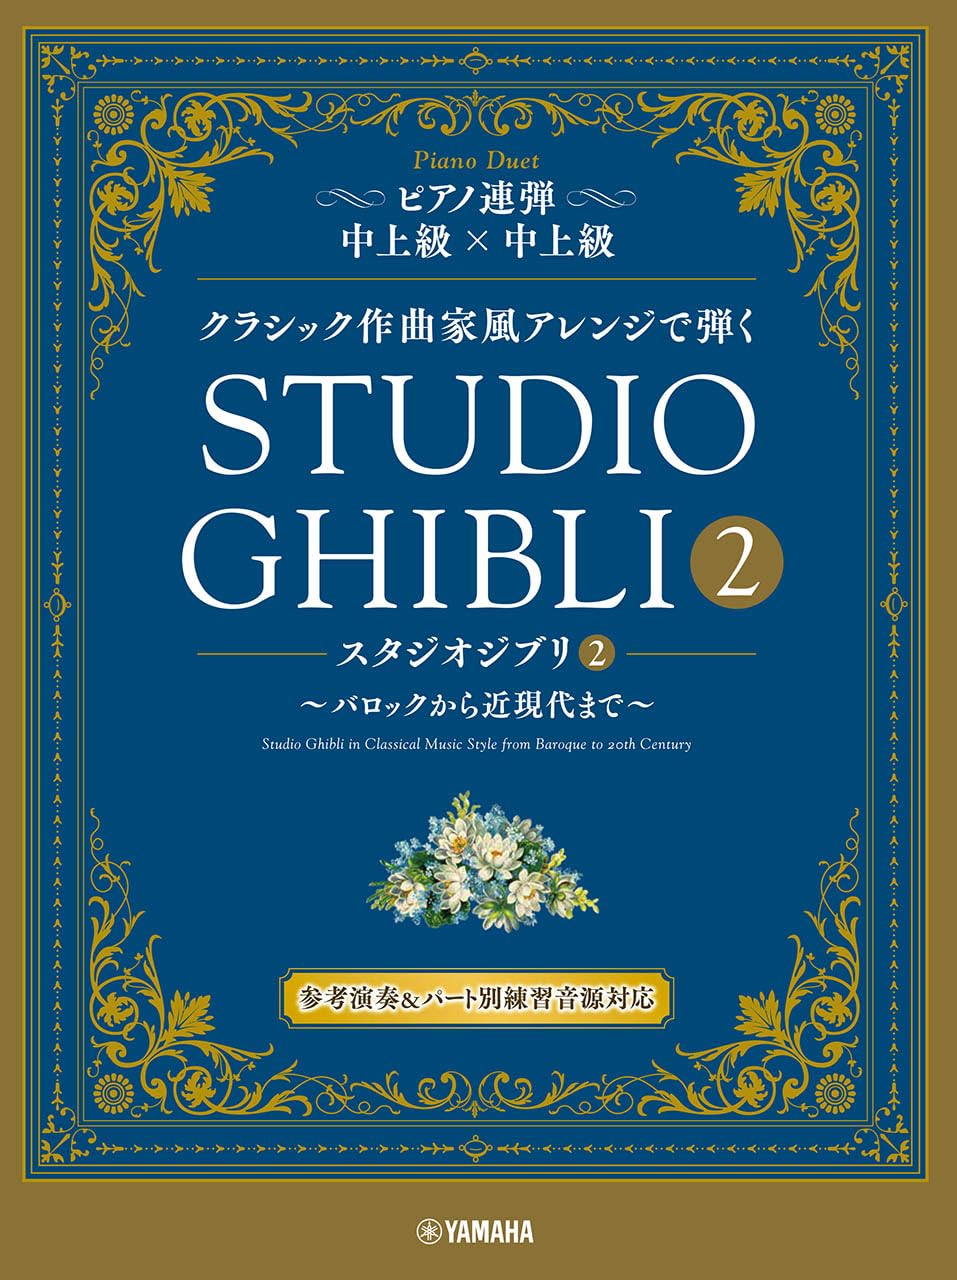 Studio Ghibli 2 in Classical Music Style from Baroque Era to 20th Century for Piano Duet(Upper-Intermediate)